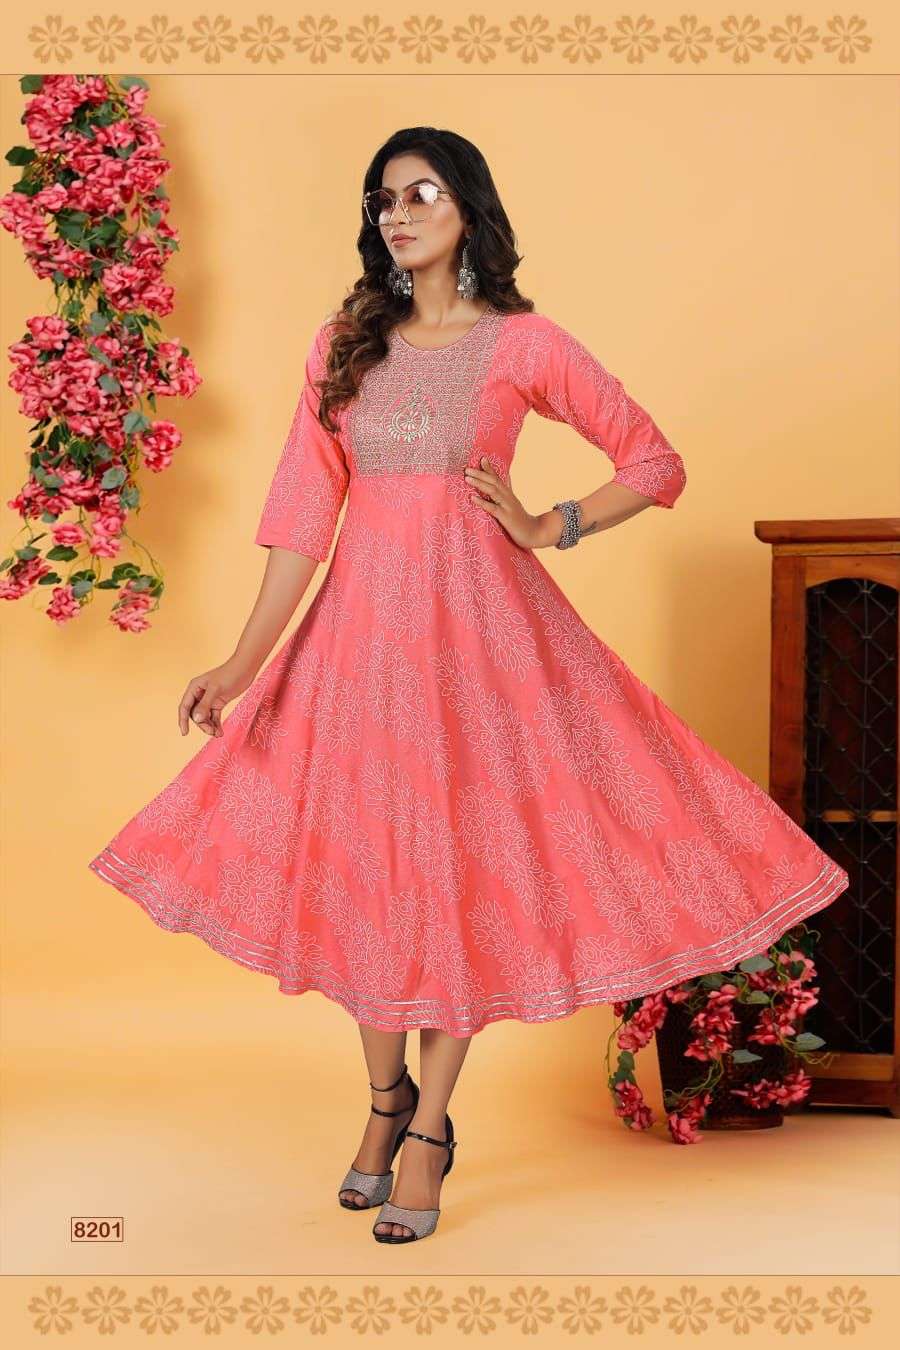 Indira 23206 Ethnic Wear Frock Style Kurti New Collection